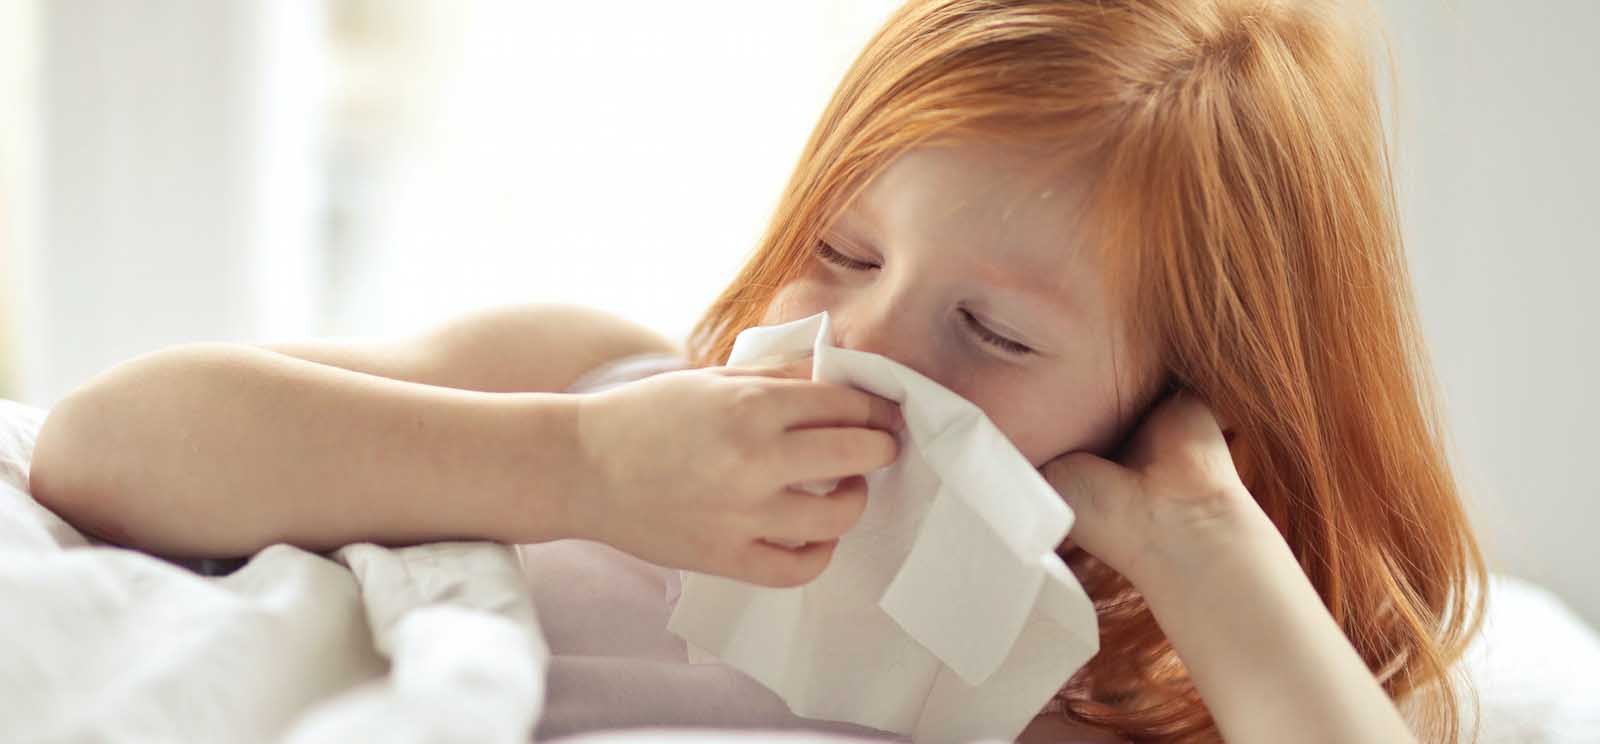 Sick Kid? How to Deal with a Child's Fever Katie Keller